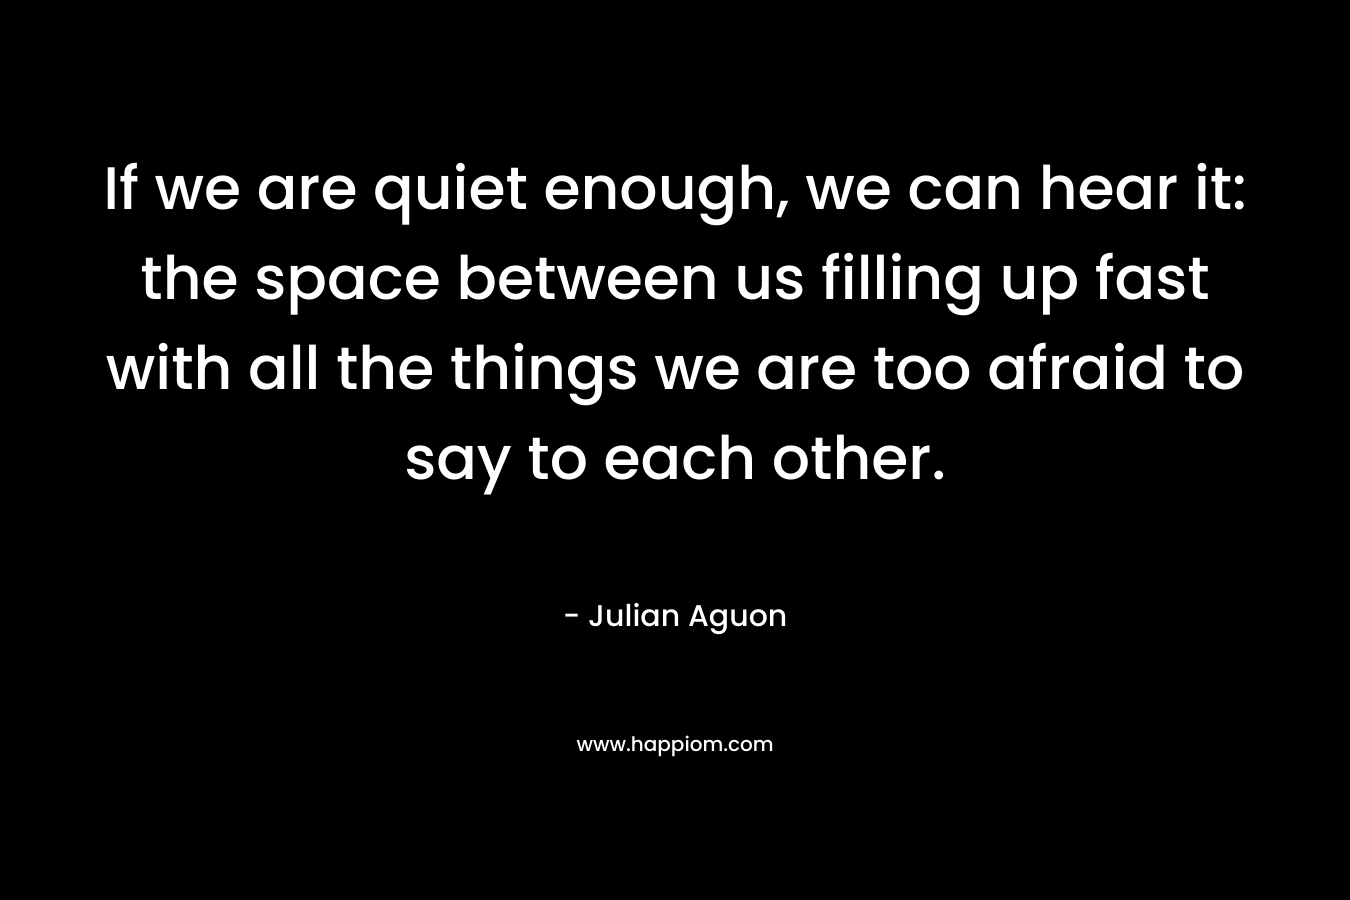 If we are quiet enough, we can hear it: the space between us filling up fast with all the things we are too afraid to say to each other.